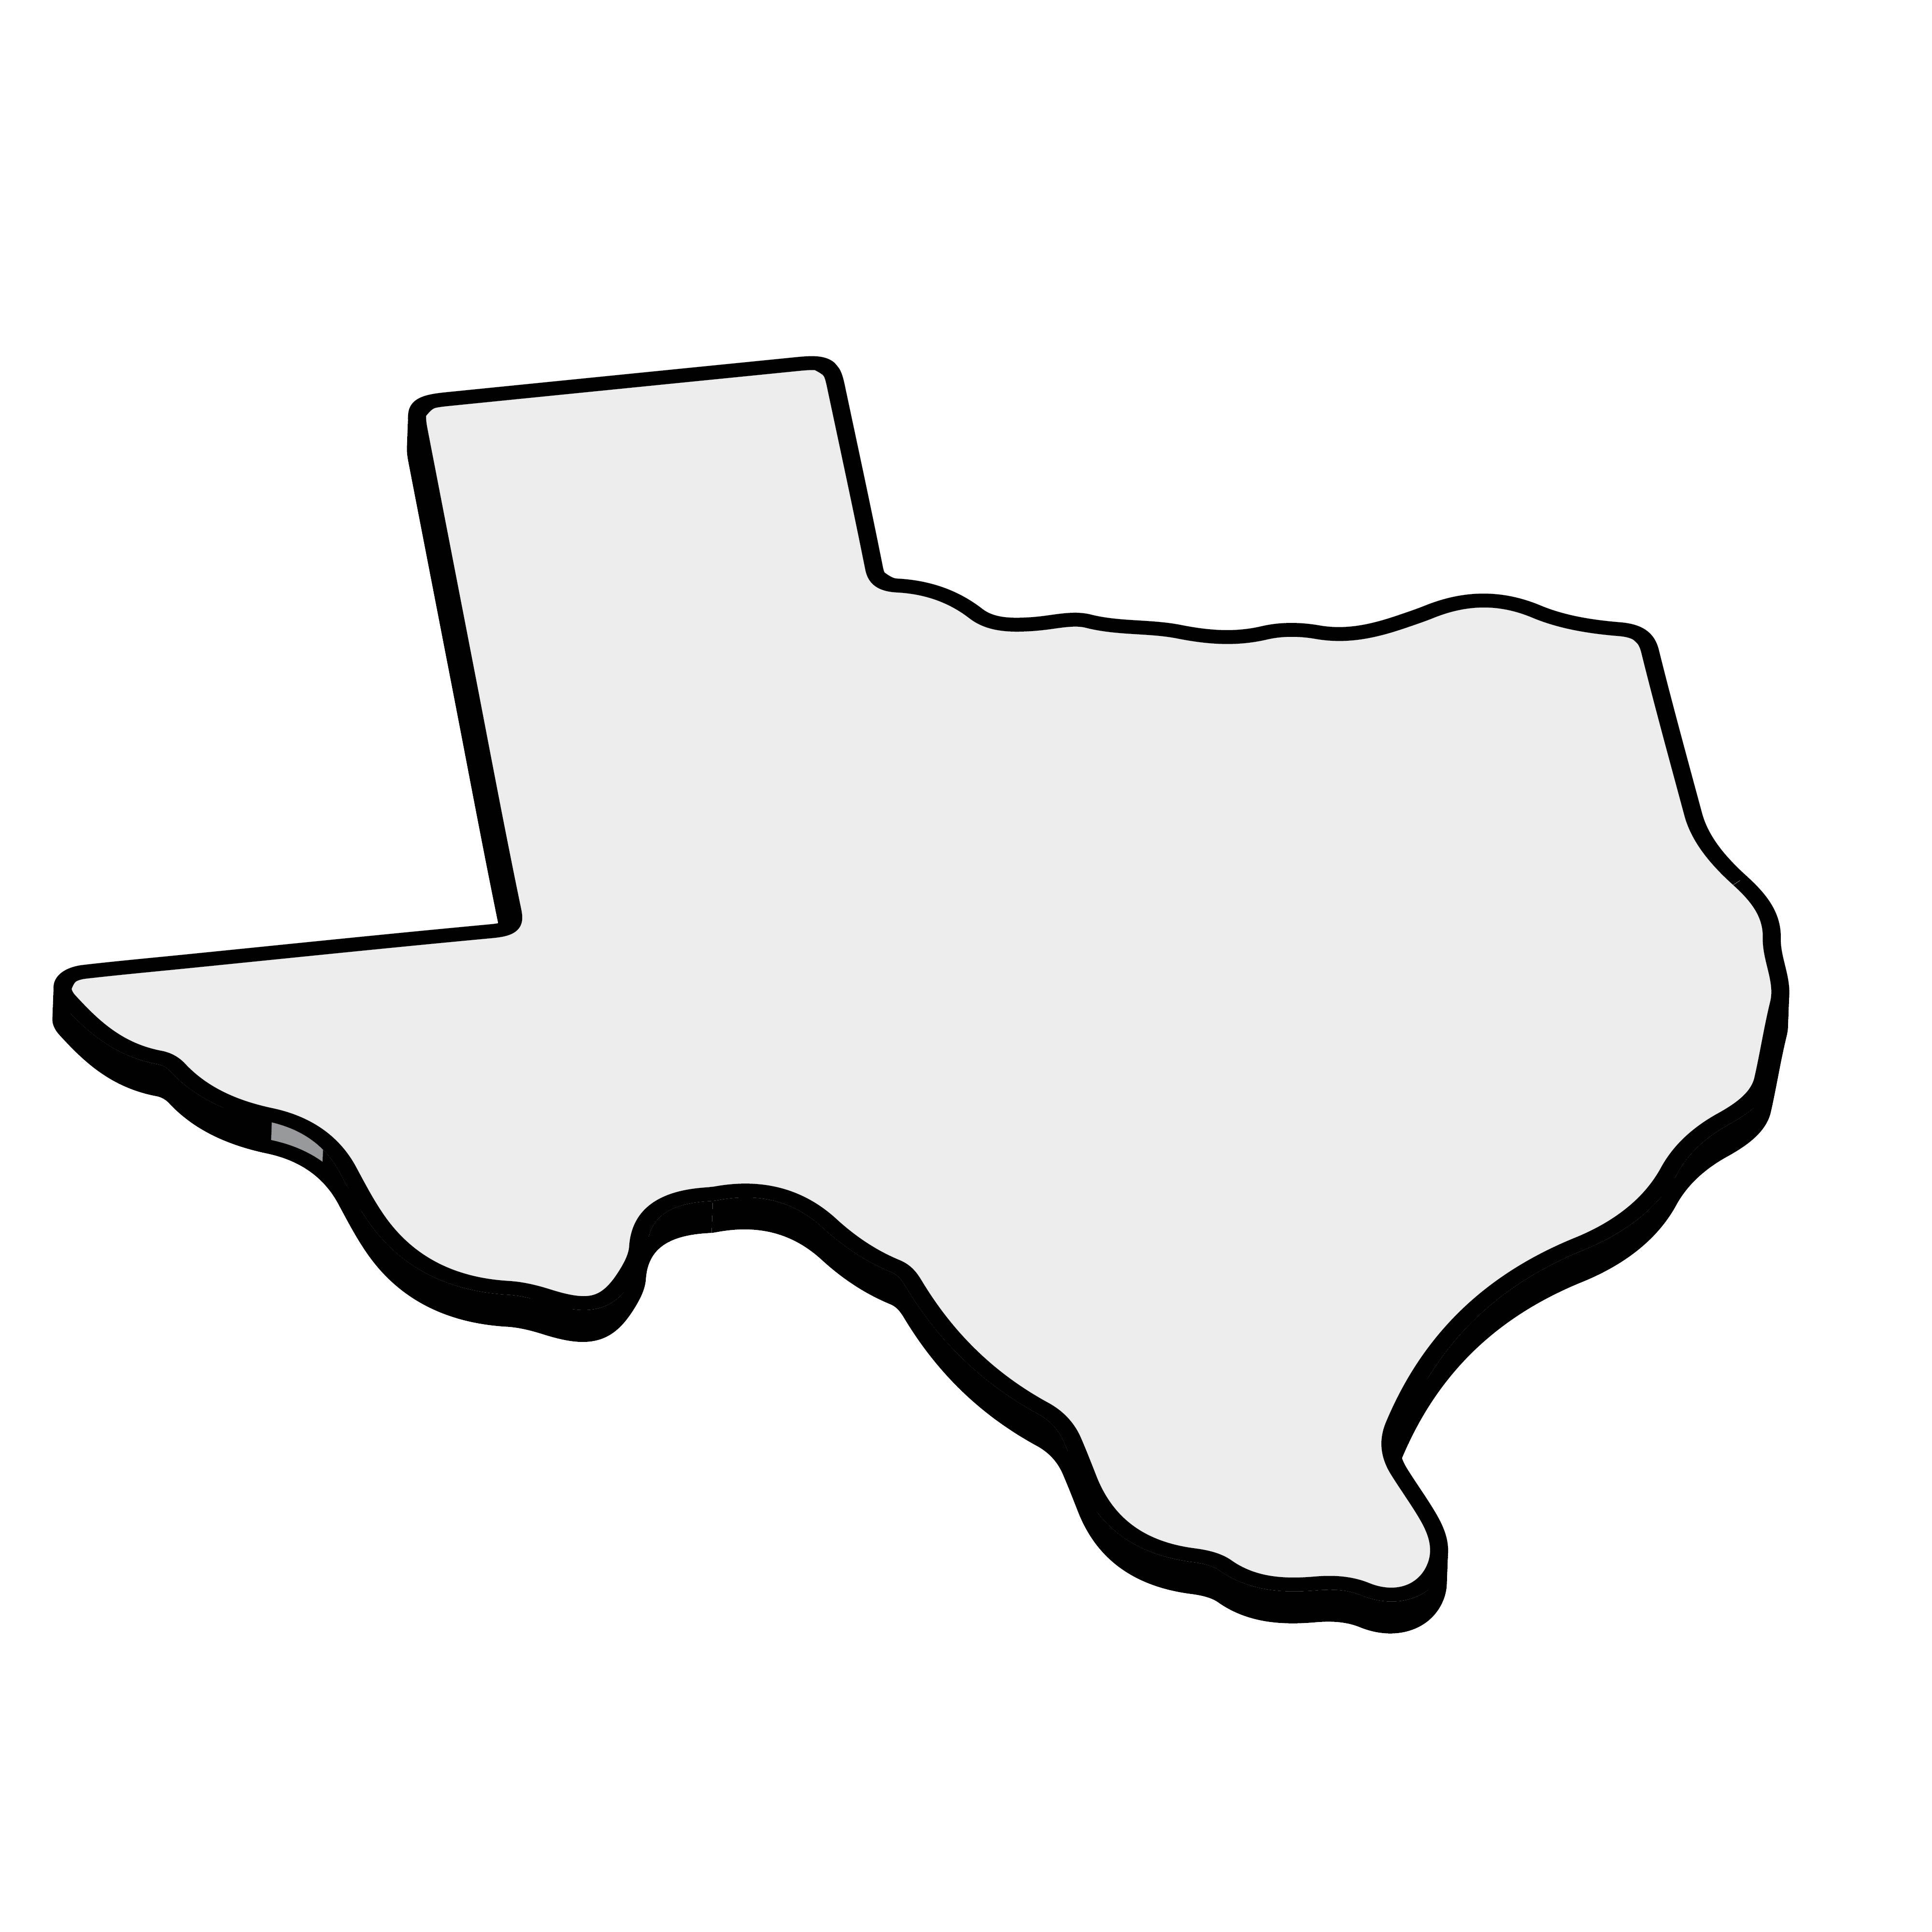 6 Best Texas Map Template Printable PDF for Free at Printablee